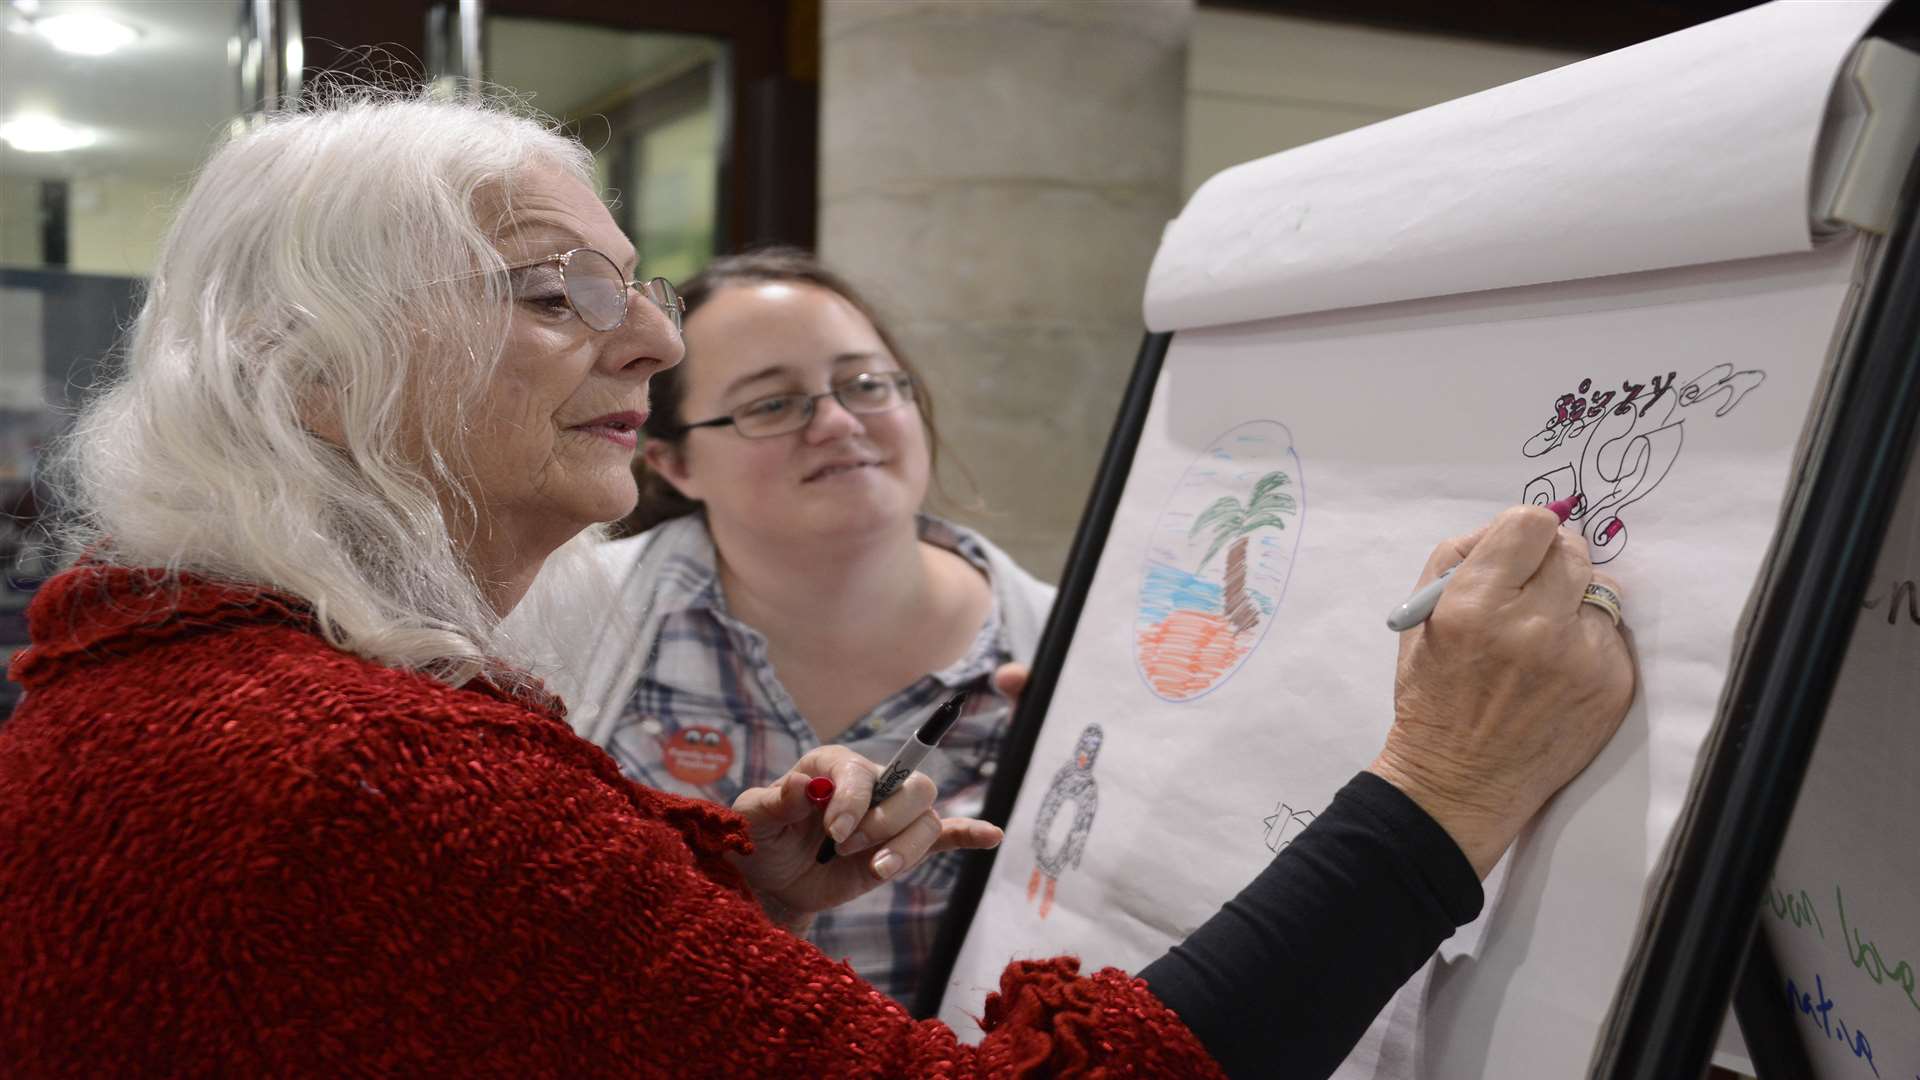 The Big Draw is for all generations